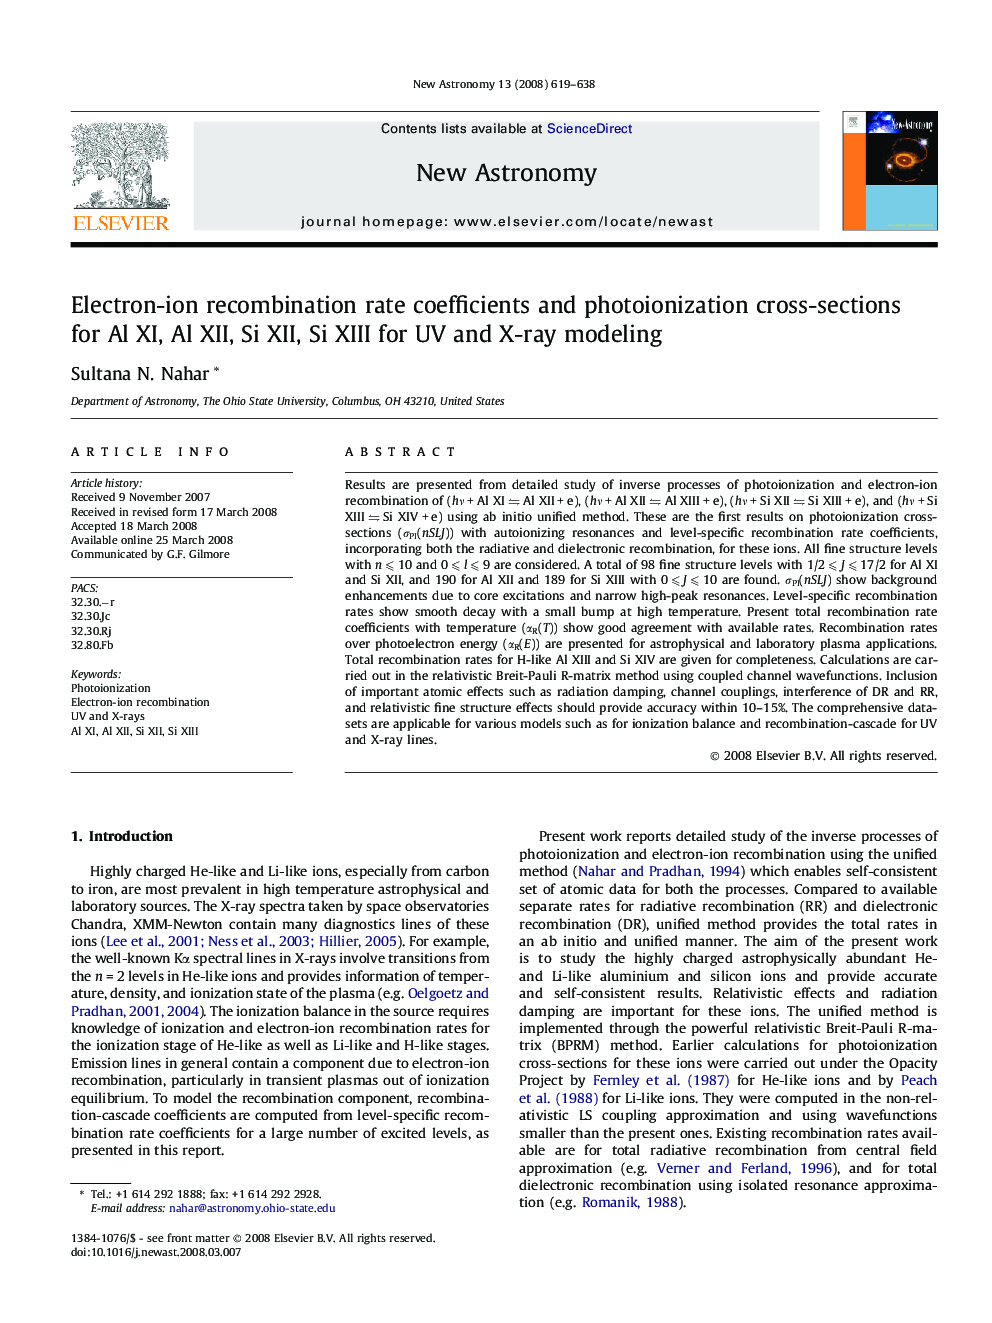 Electron-ion recombination rate coefficients and photoionization cross-sections for Al XI, Al XII, Si XII, Si XIII for UV and X-ray modeling